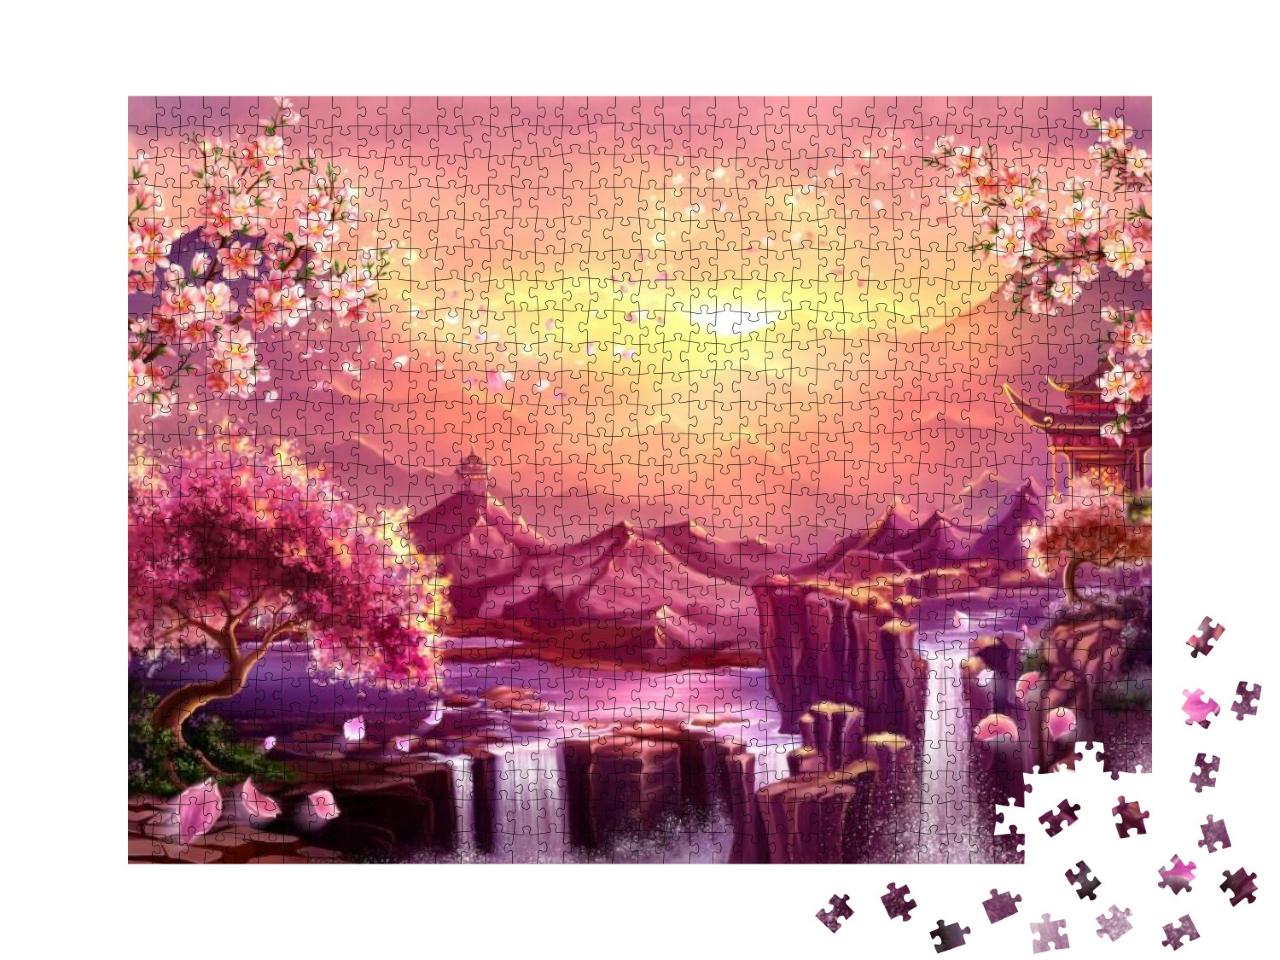 Oriental Background, Digital Art. Illustration of a Mount... Jigsaw Puzzle with 1000 pieces